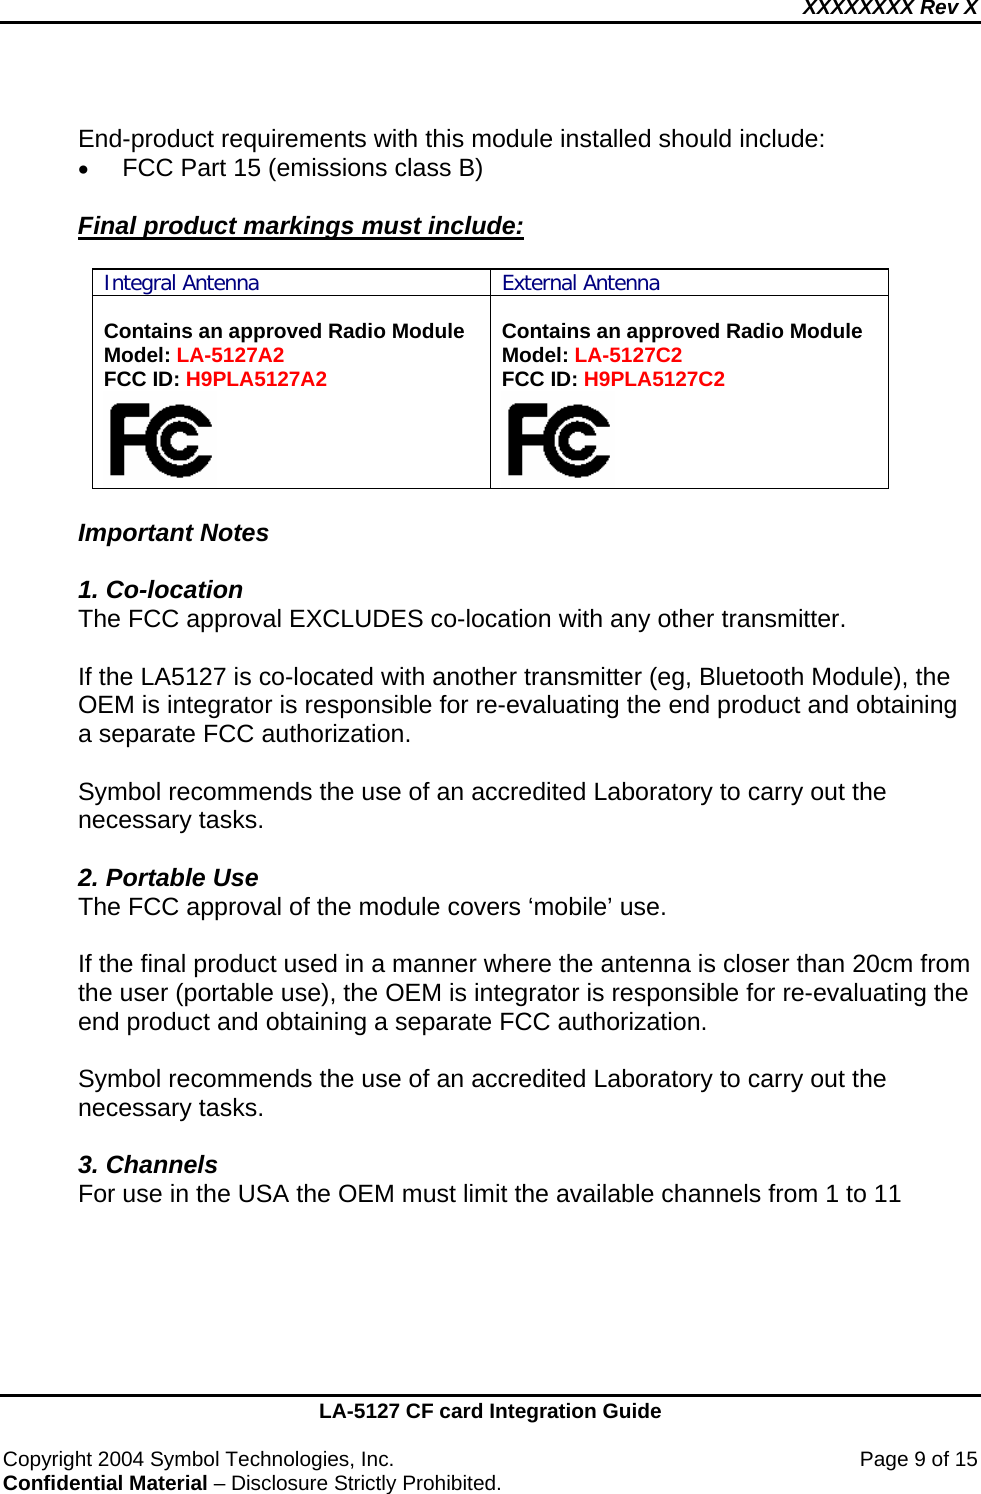 XXXXXXXX Rev X    LA-5127 CF card Integration Guide  Copyright 2004 Symbol Technologies, Inc.    Page 9 of 15 Confidential Material – Disclosure Strictly Prohibited.  End-product requirements with this module installed should include: • FCC Part 15 (emissions class B)  Final product markings must include:  Integral Antenna External Antenna  Contains an approved Radio Module Model: LA-5127A2 FCC ID: H9PLA5127A2   Contains an approved Radio Module Model: LA-5127C2 FCC ID: H9PLA5127C2   Important Notes  1. Co-location The FCC approval EXCLUDES co-location with any other transmitter.    If the LA5127 is co-located with another transmitter (eg, Bluetooth Module), the OEM is integrator is responsible for re-evaluating the end product and obtaining a separate FCC authorization.    Symbol recommends the use of an accredited Laboratory to carry out the necessary tasks.  2. Portable Use The FCC approval of the module covers ‘mobile’ use.     If the final product used in a manner where the antenna is closer than 20cm from the user (portable use), the OEM is integrator is responsible for re-evaluating the end product and obtaining a separate FCC authorization.   Symbol recommends the use of an accredited Laboratory to carry out the necessary tasks.  3. Channels For use in the USA the OEM must limit the available channels from 1 to 11        